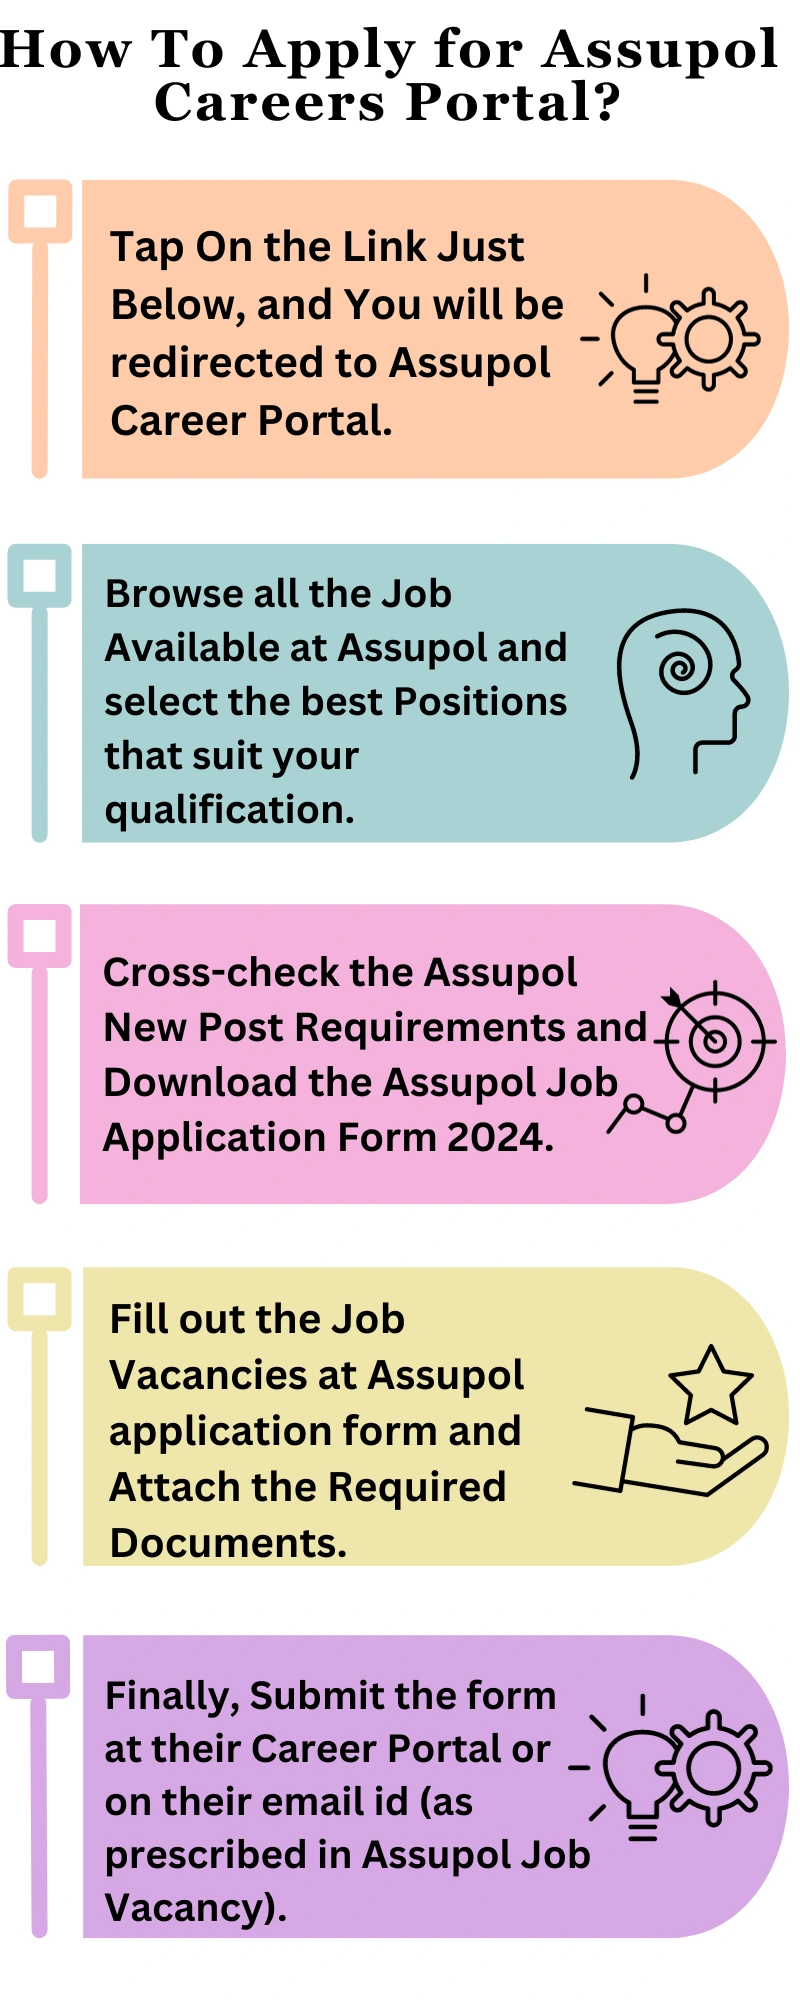 How To Apply for Assupol Careers Portal?